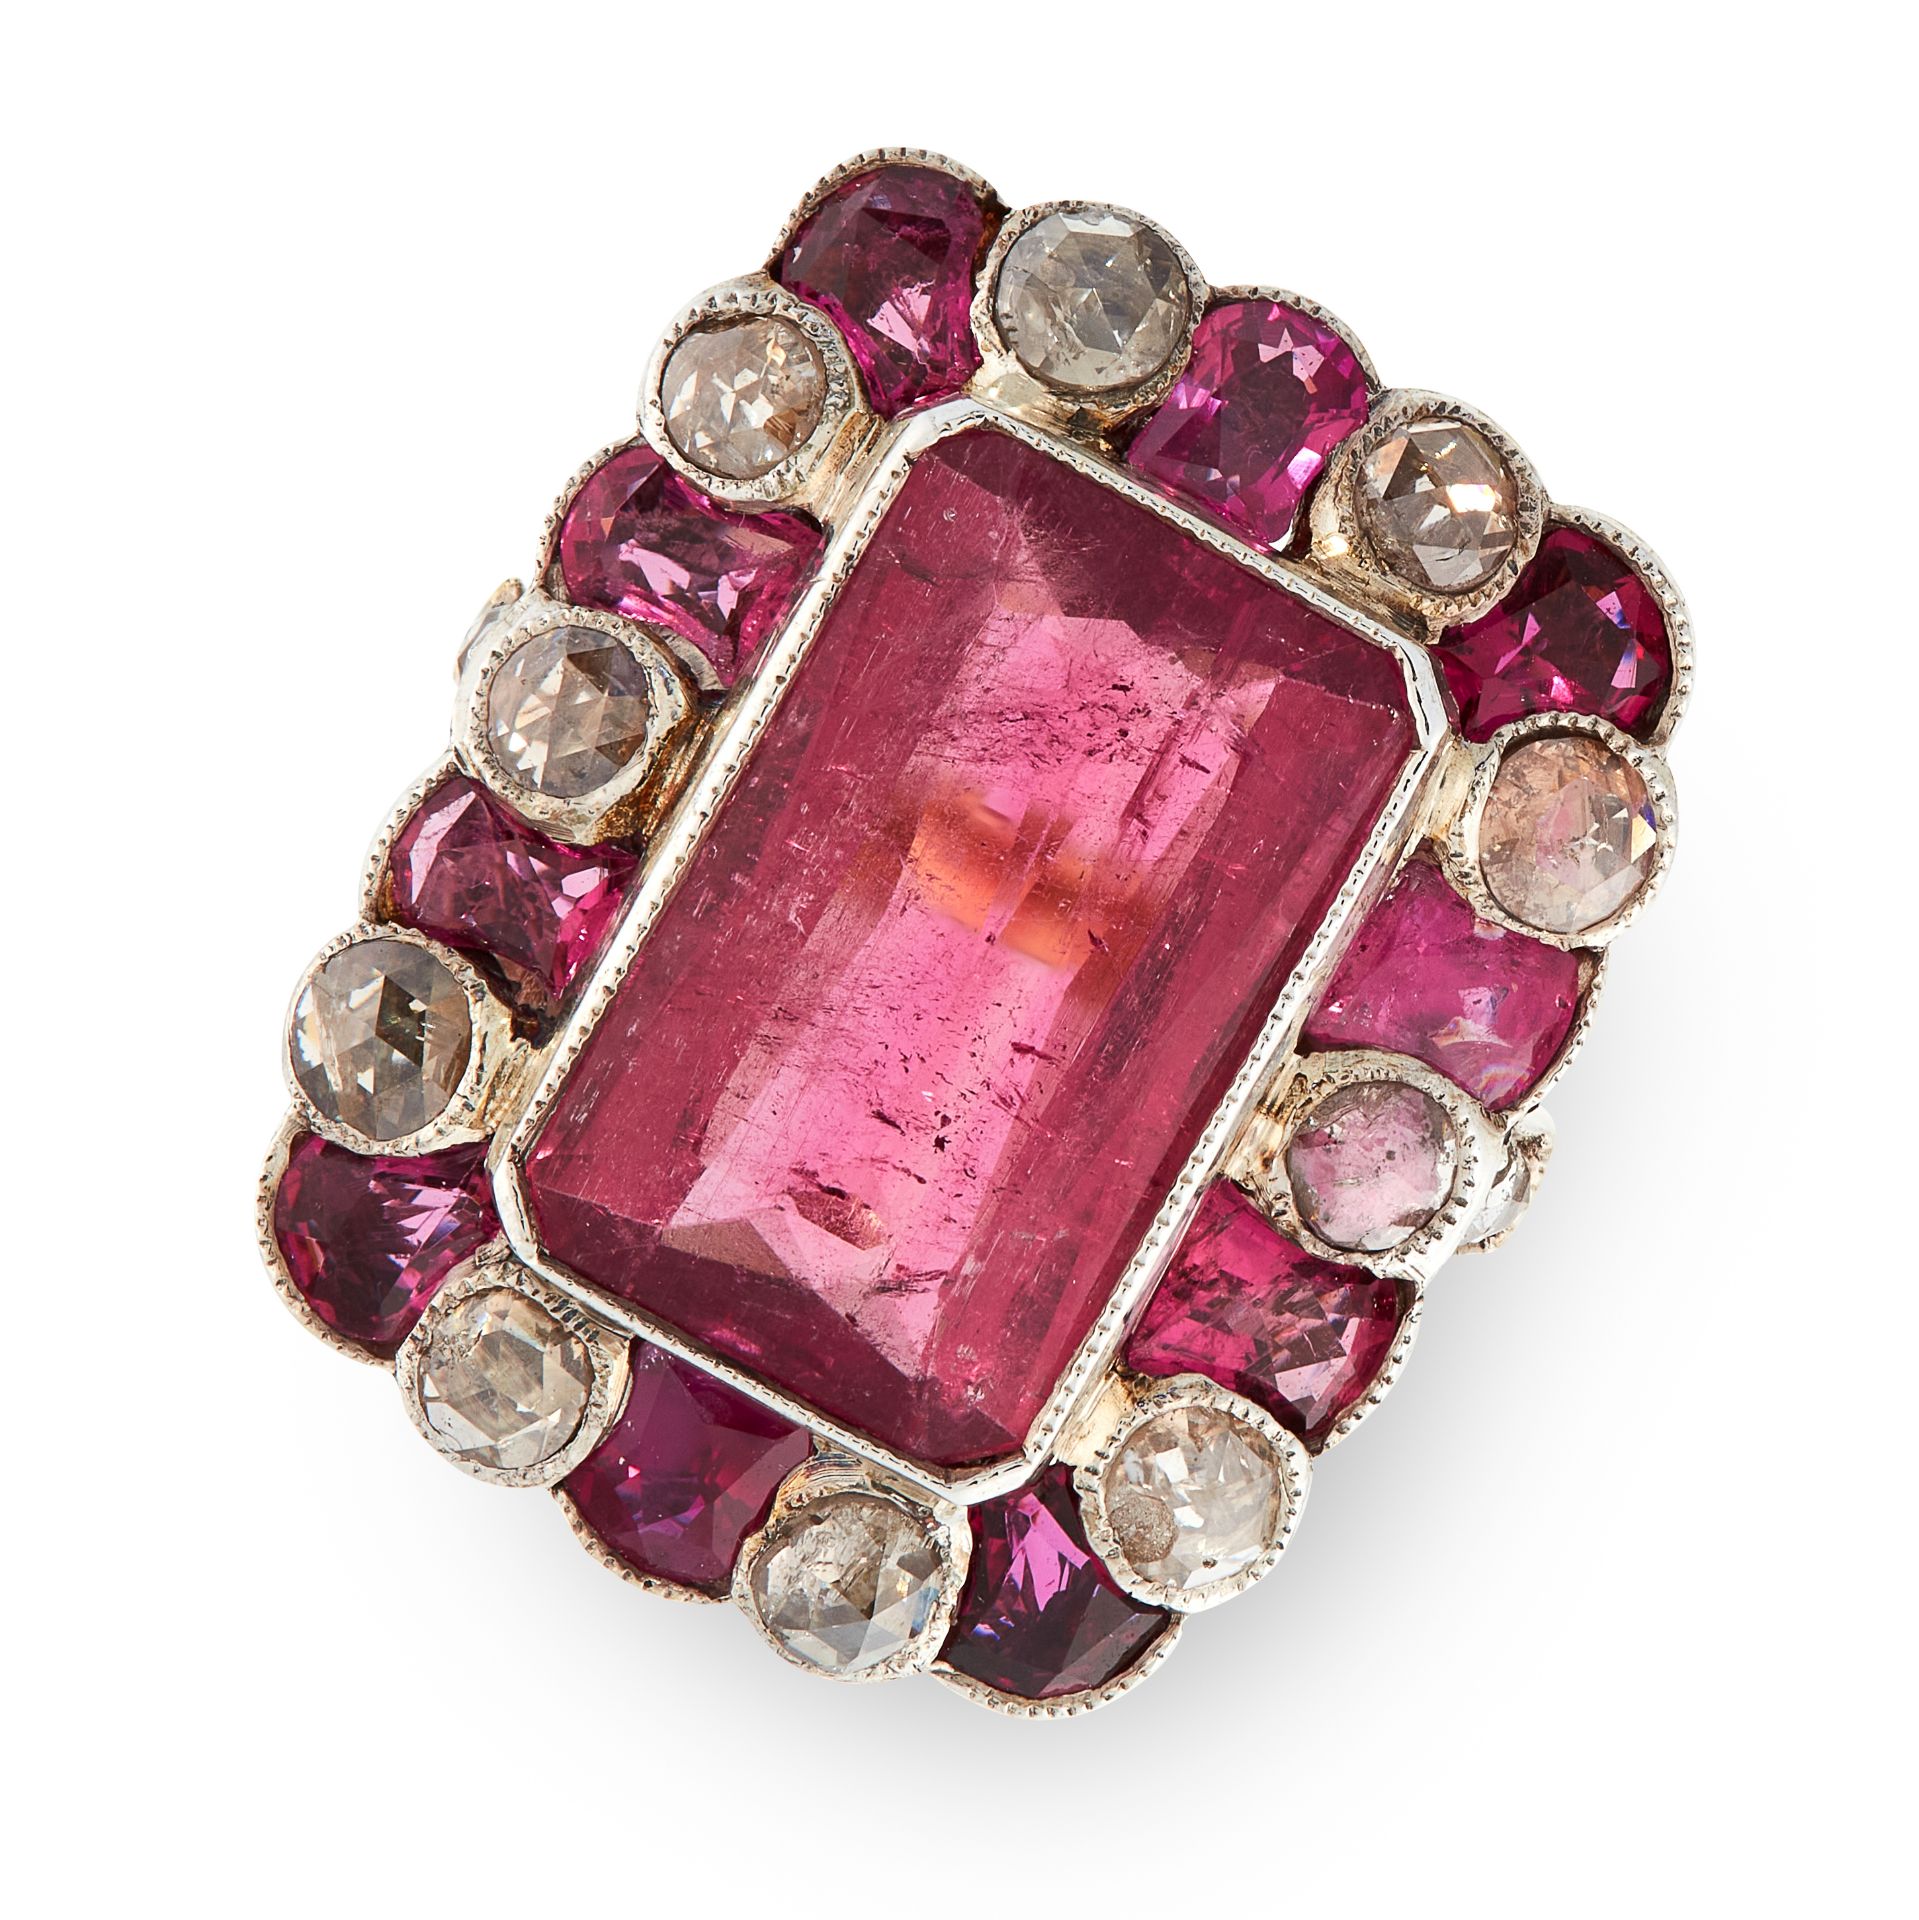 A TOURMALINE, RUBY AND DIAMOND RING in yellow gold, set with a mixed octagonal cut tourmaline of 4.